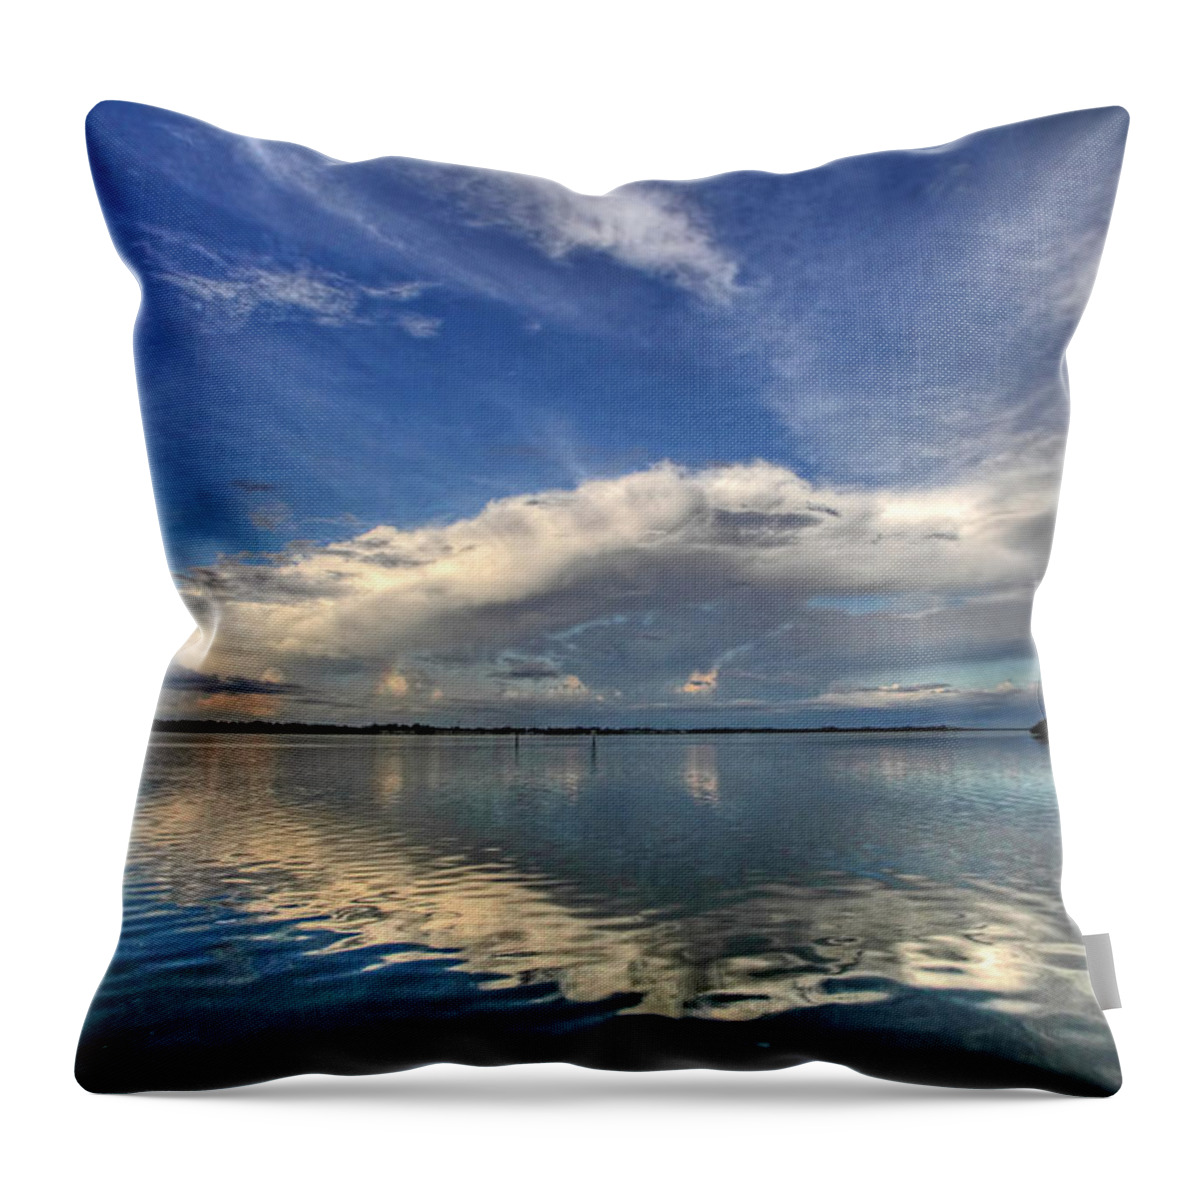 Clouds Throw Pillow featuring the photograph Cloudscape by HH Photography of Florida